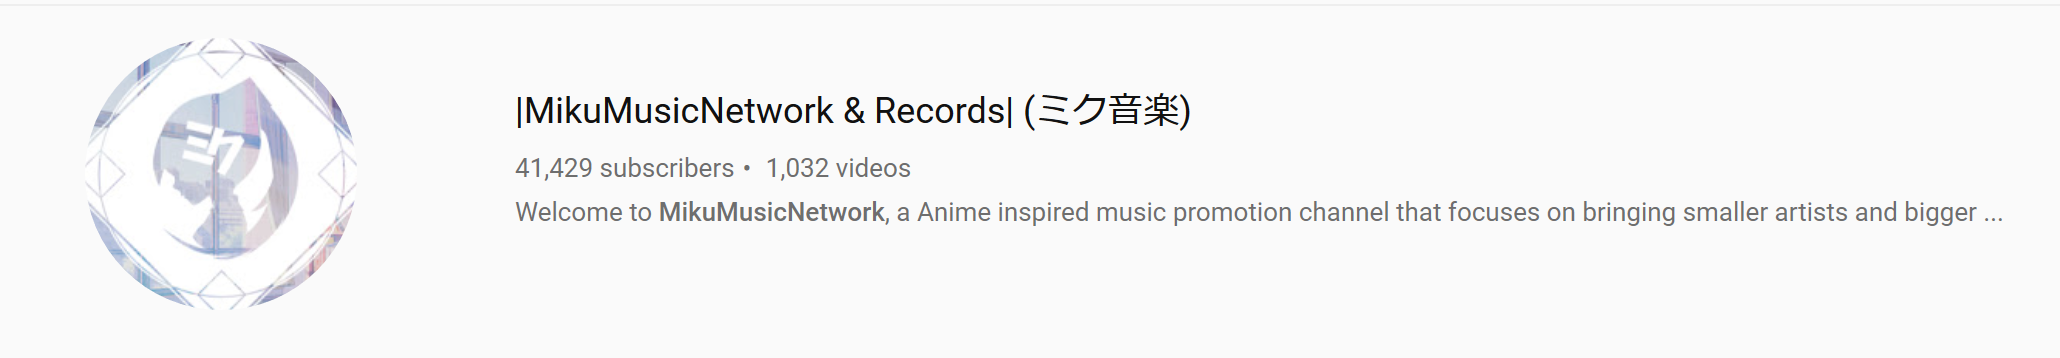 Search Result for MikuMusicNetwork